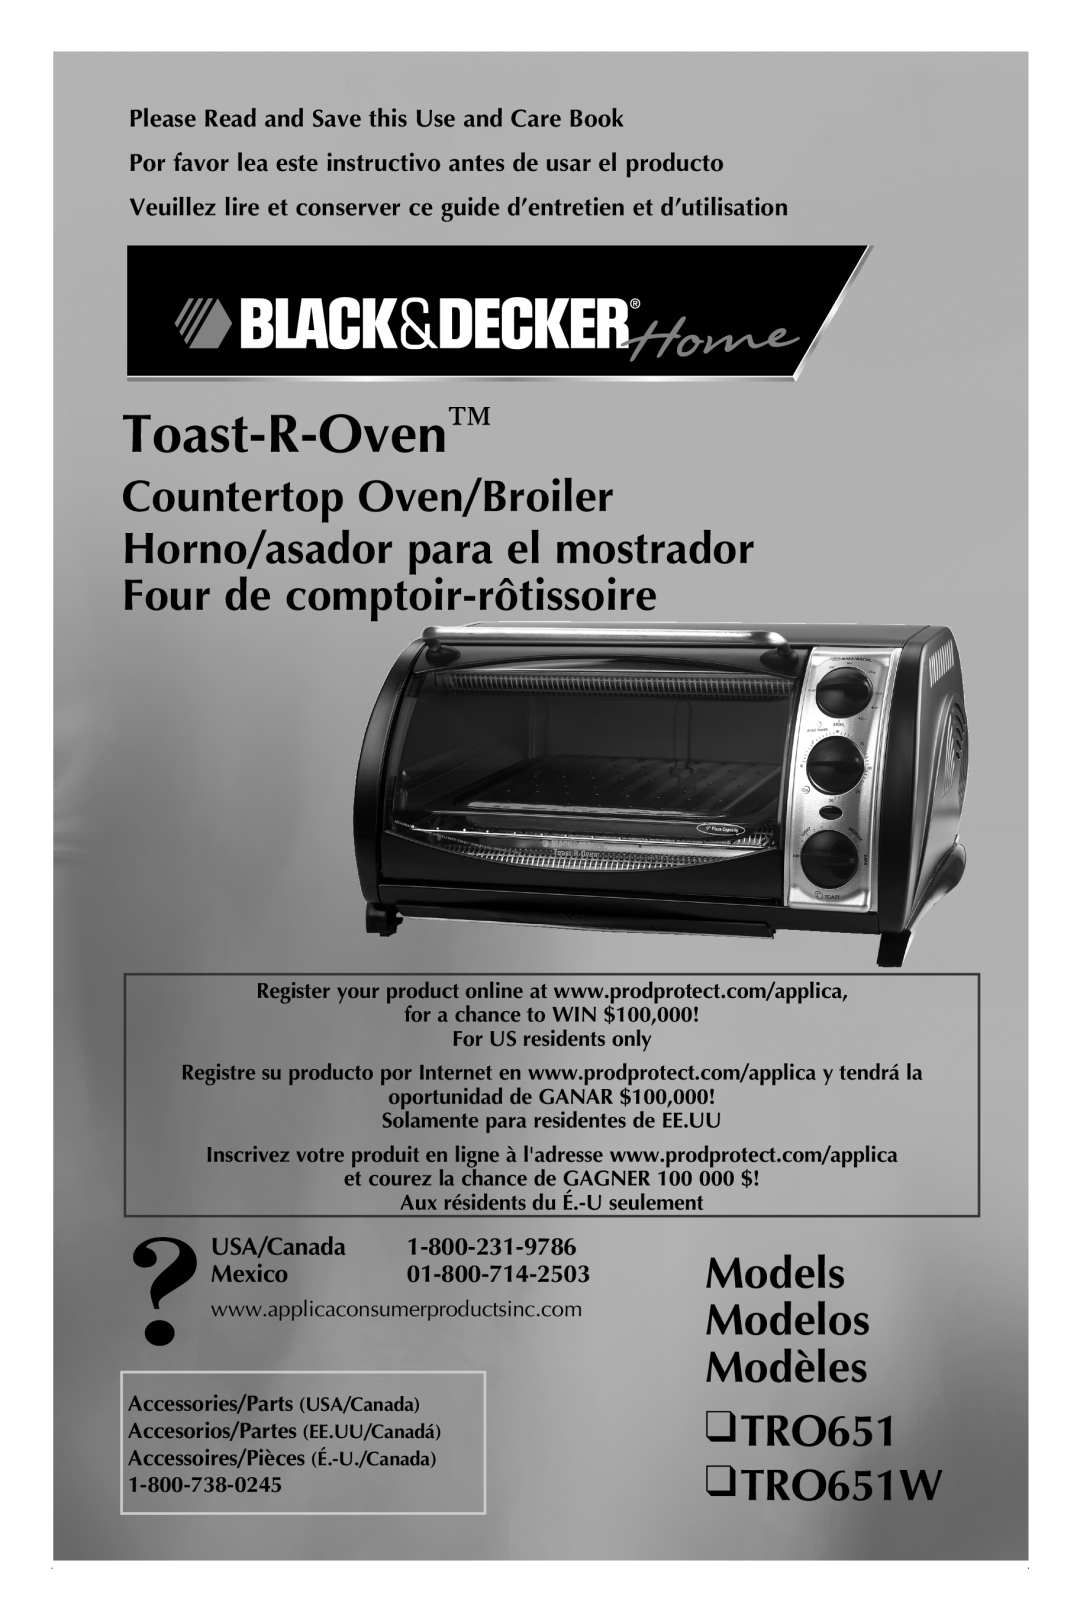 Black & Decker manual Toast-R-Oven, Models Modelos Modèles TRO651 TRO651W, Please Read and Save this Use and Care Book 